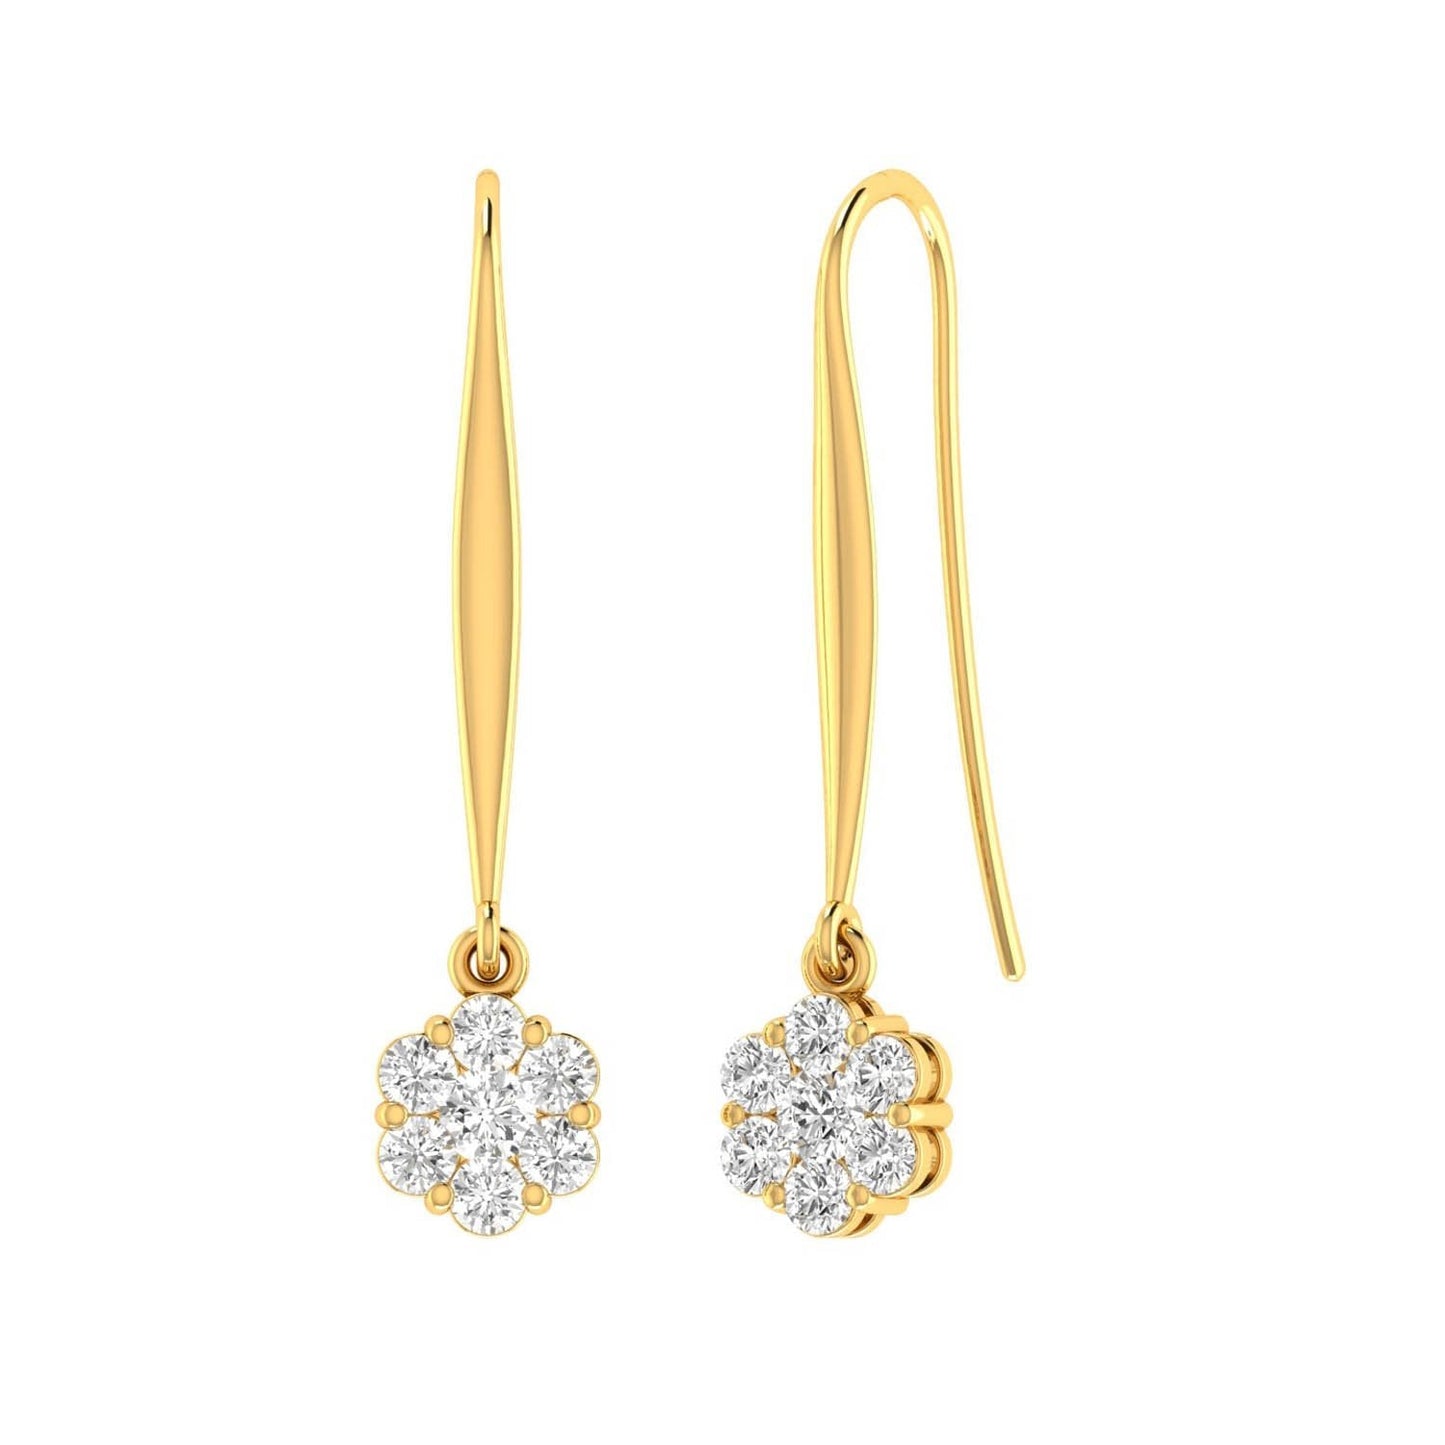 Cluster Hook Diamond Earrings with 1.00ct Diamonds in 9K Yellow Gold - 9YSH100GH